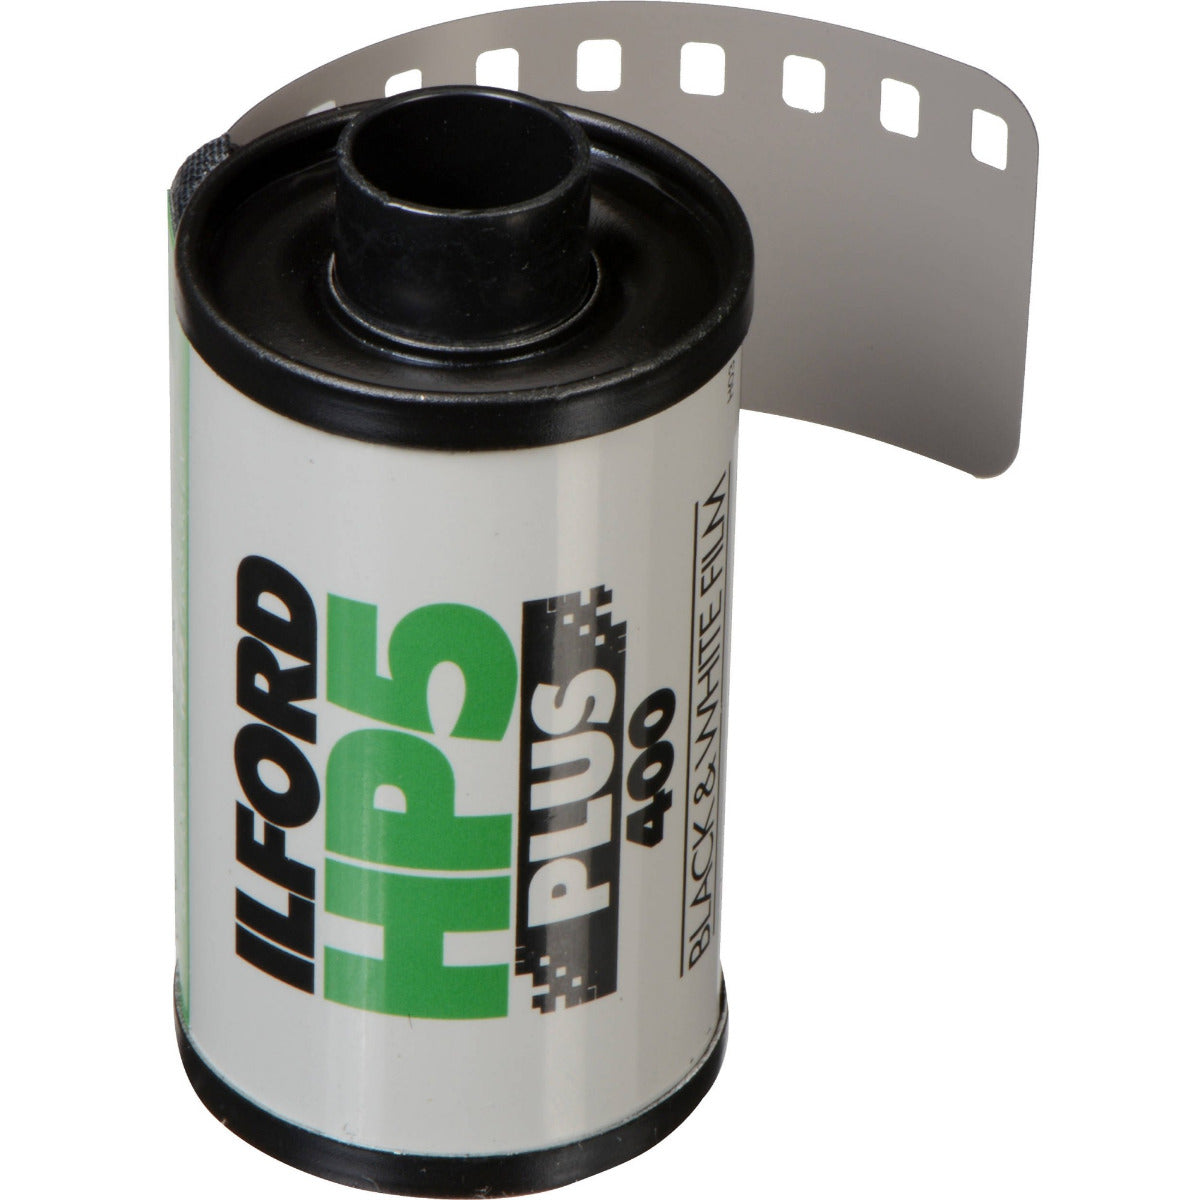 Product Image of Ilford HP5 plus 400 Black & White 35mm Film -24 exp